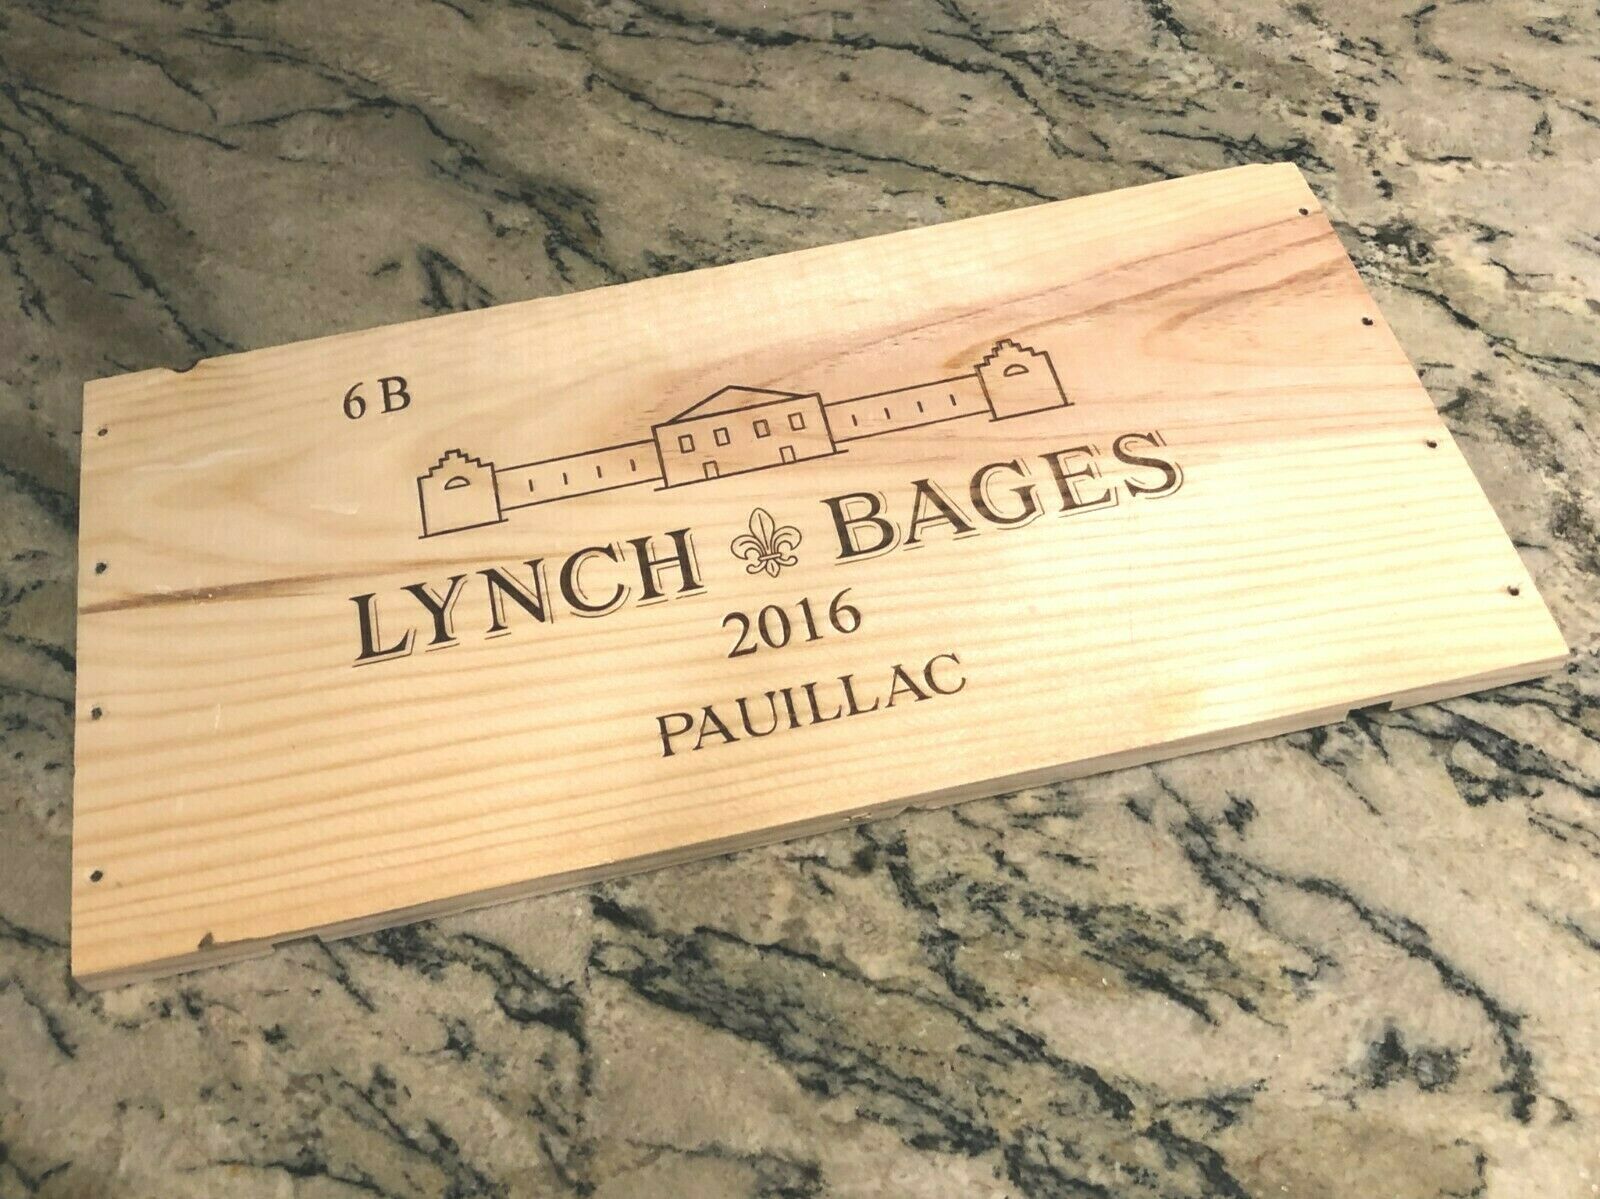 Chateau Lynch Bages Pauillac Region France Wine Crate Box Side 1 Panel